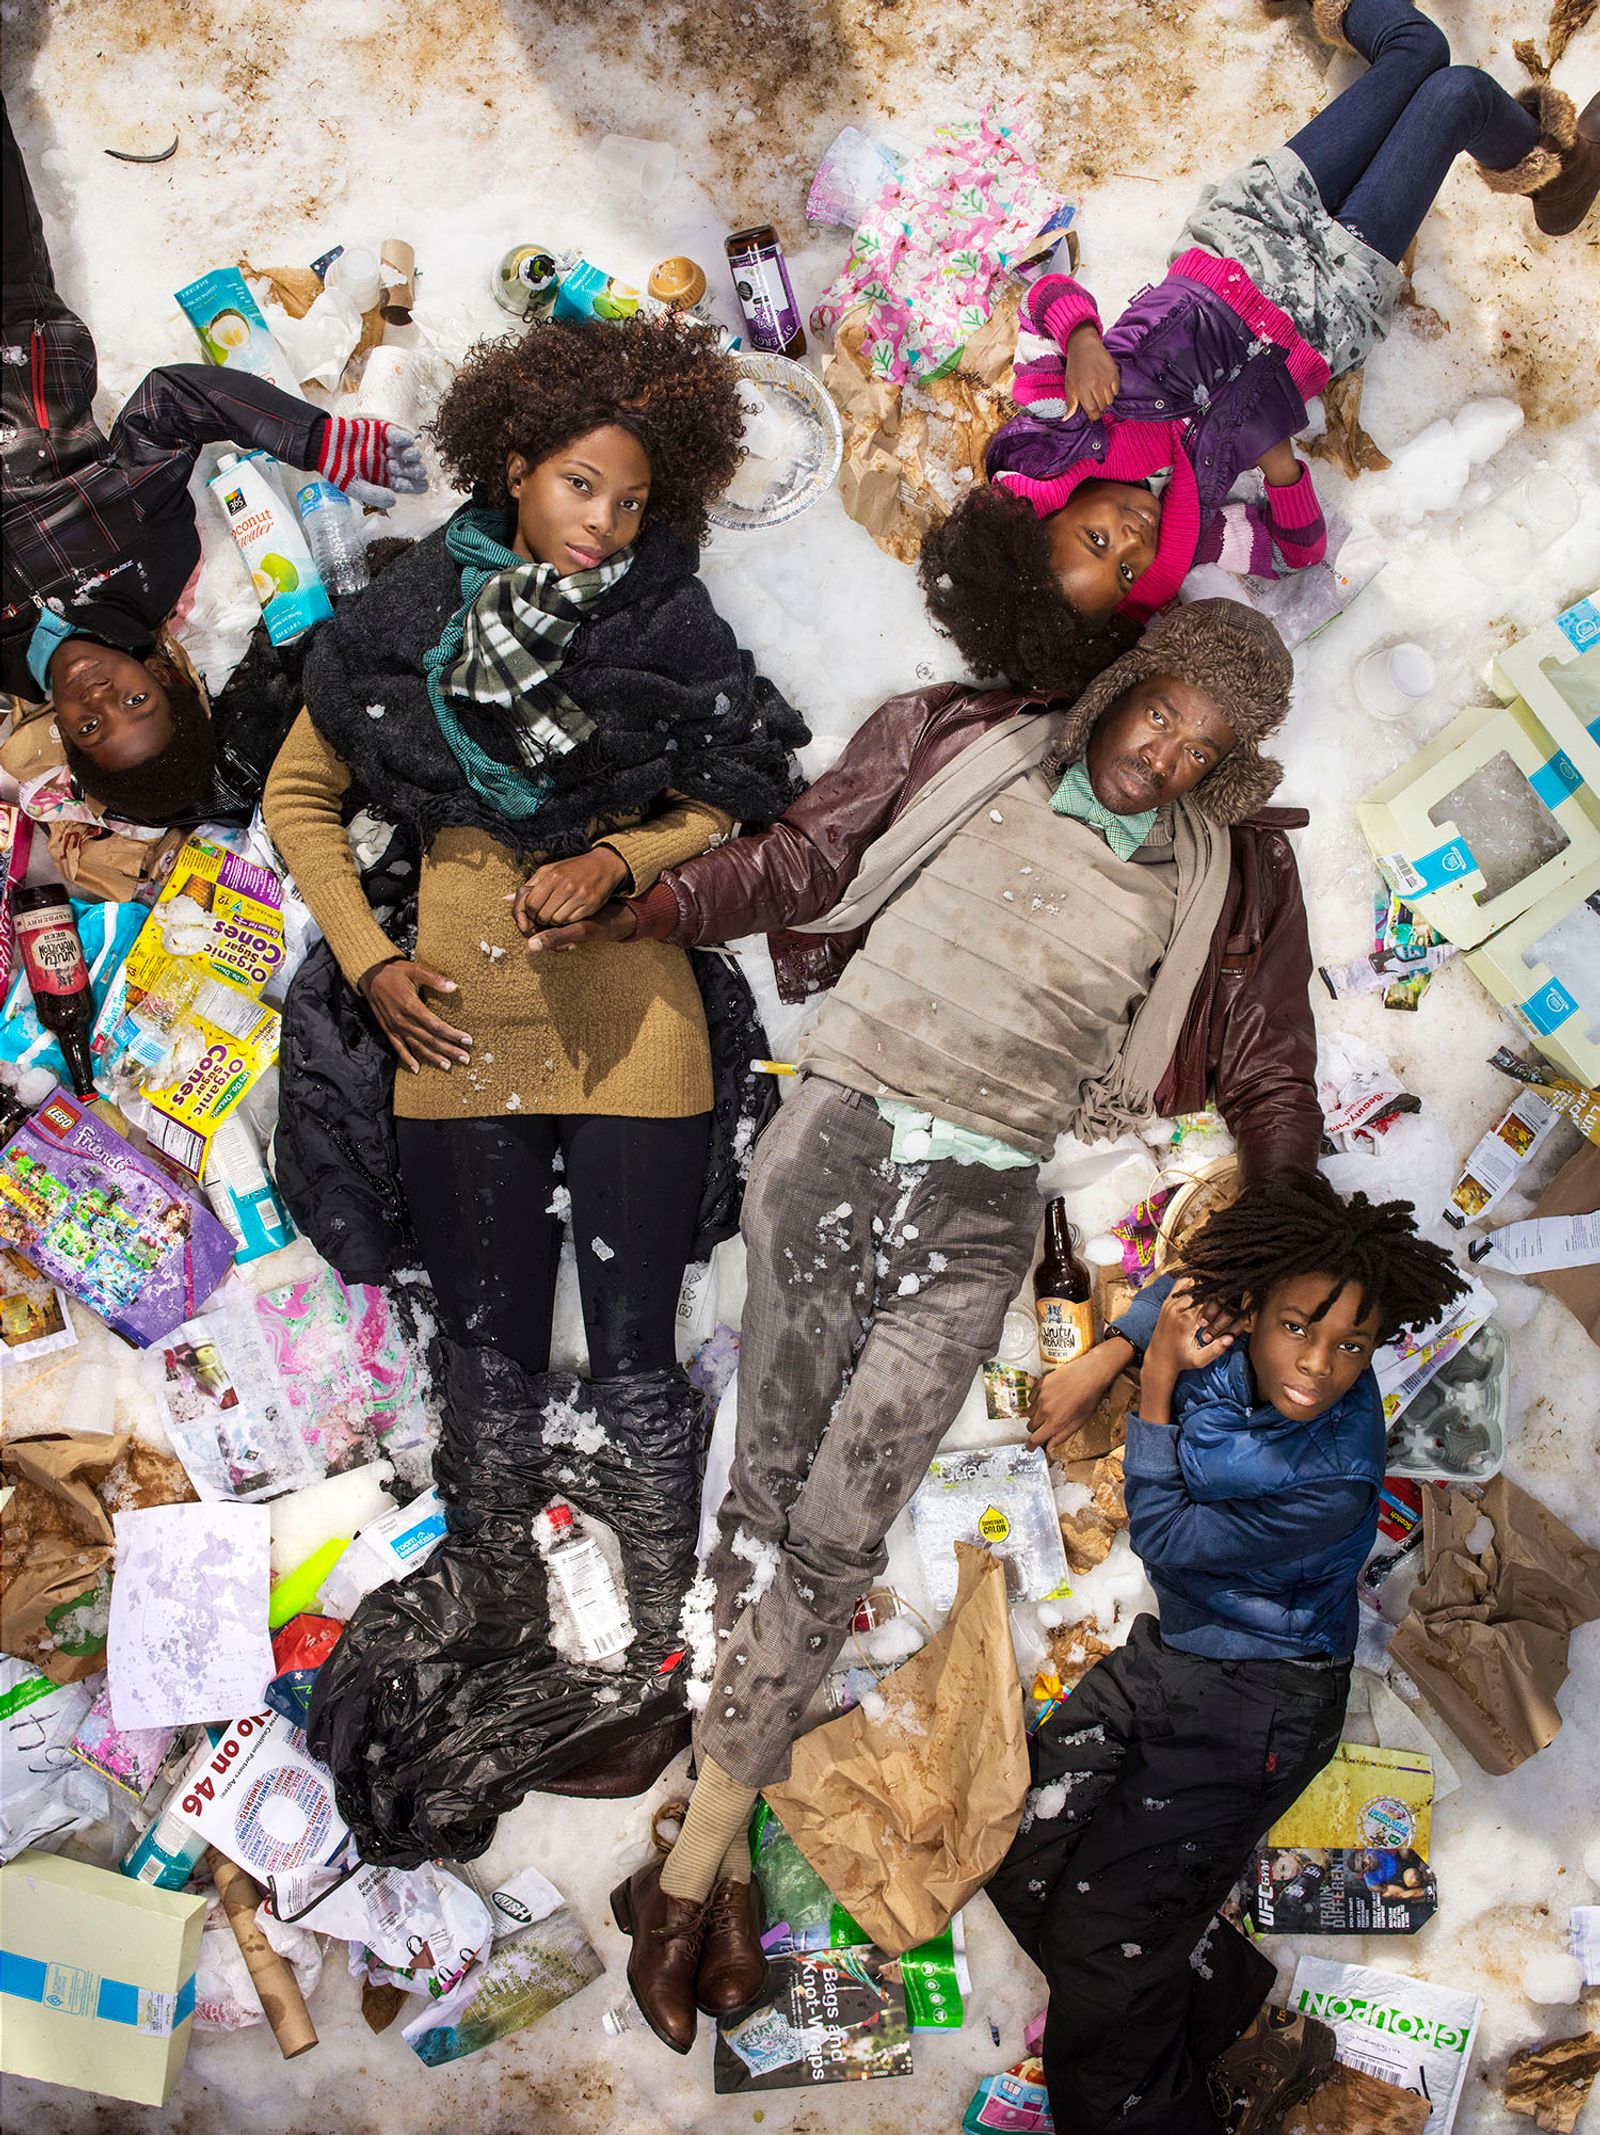 © Gregg Segal - Image from the 7 Days of Garbage photography project